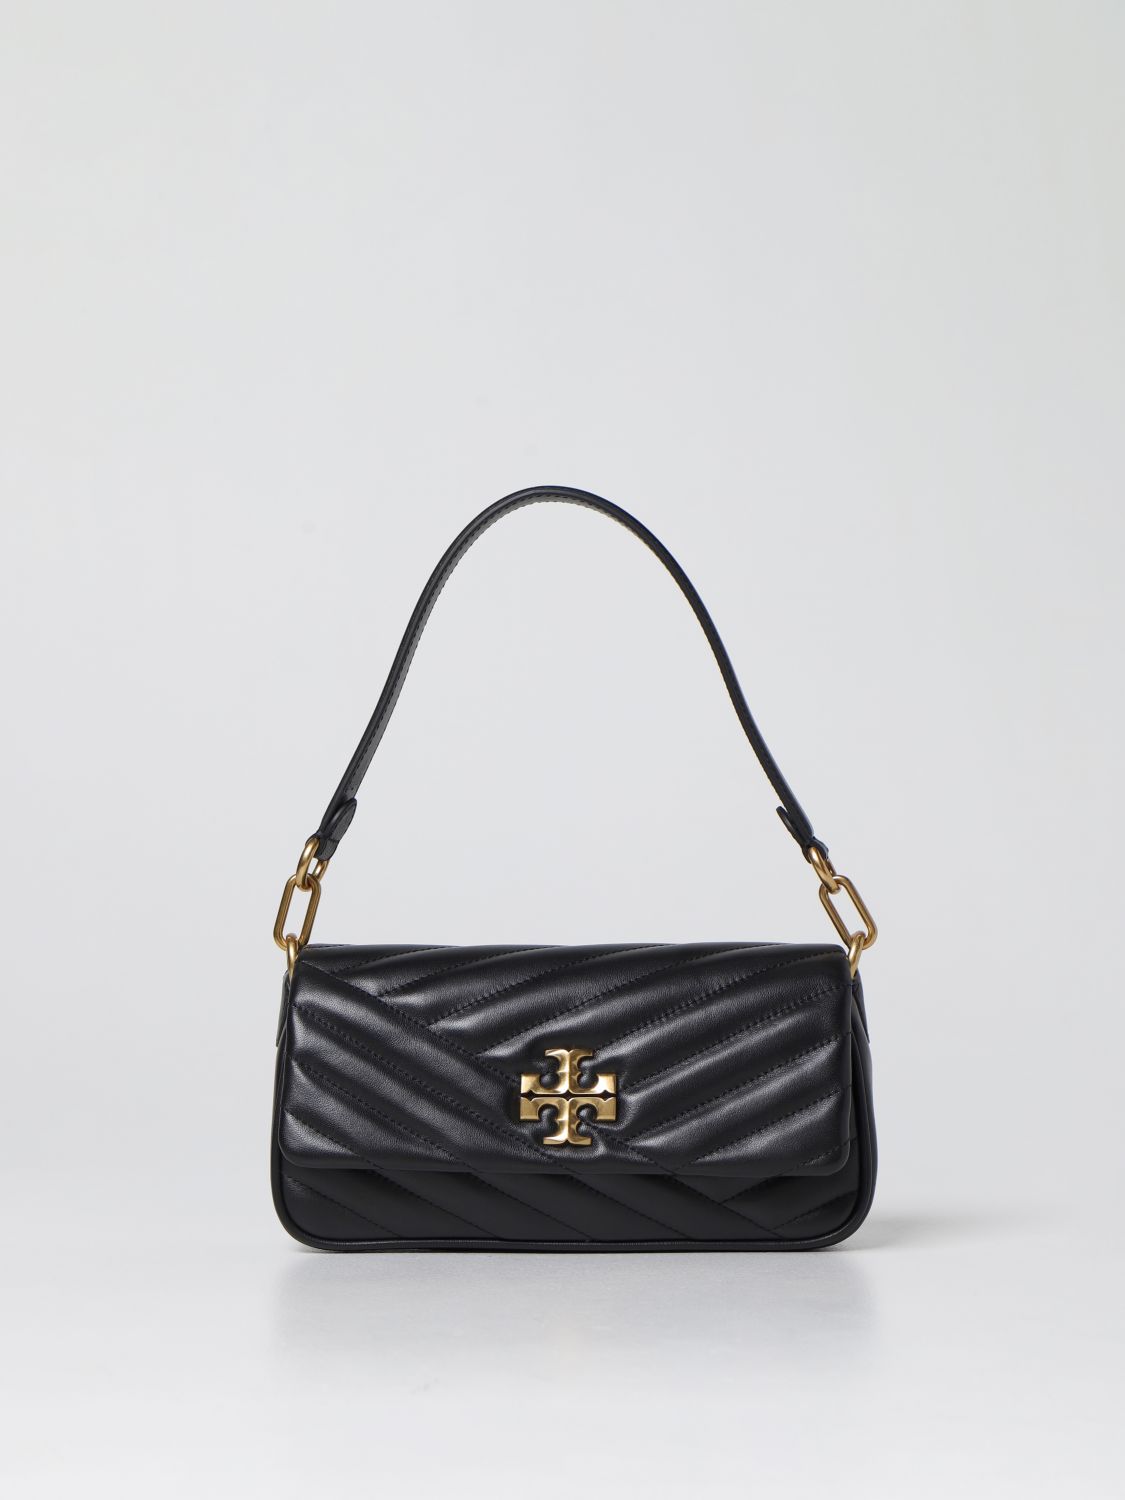 TORY BURCH: Kira bag in quilted leather - Lemon  Tory Burch shoulder bag  90452 online at